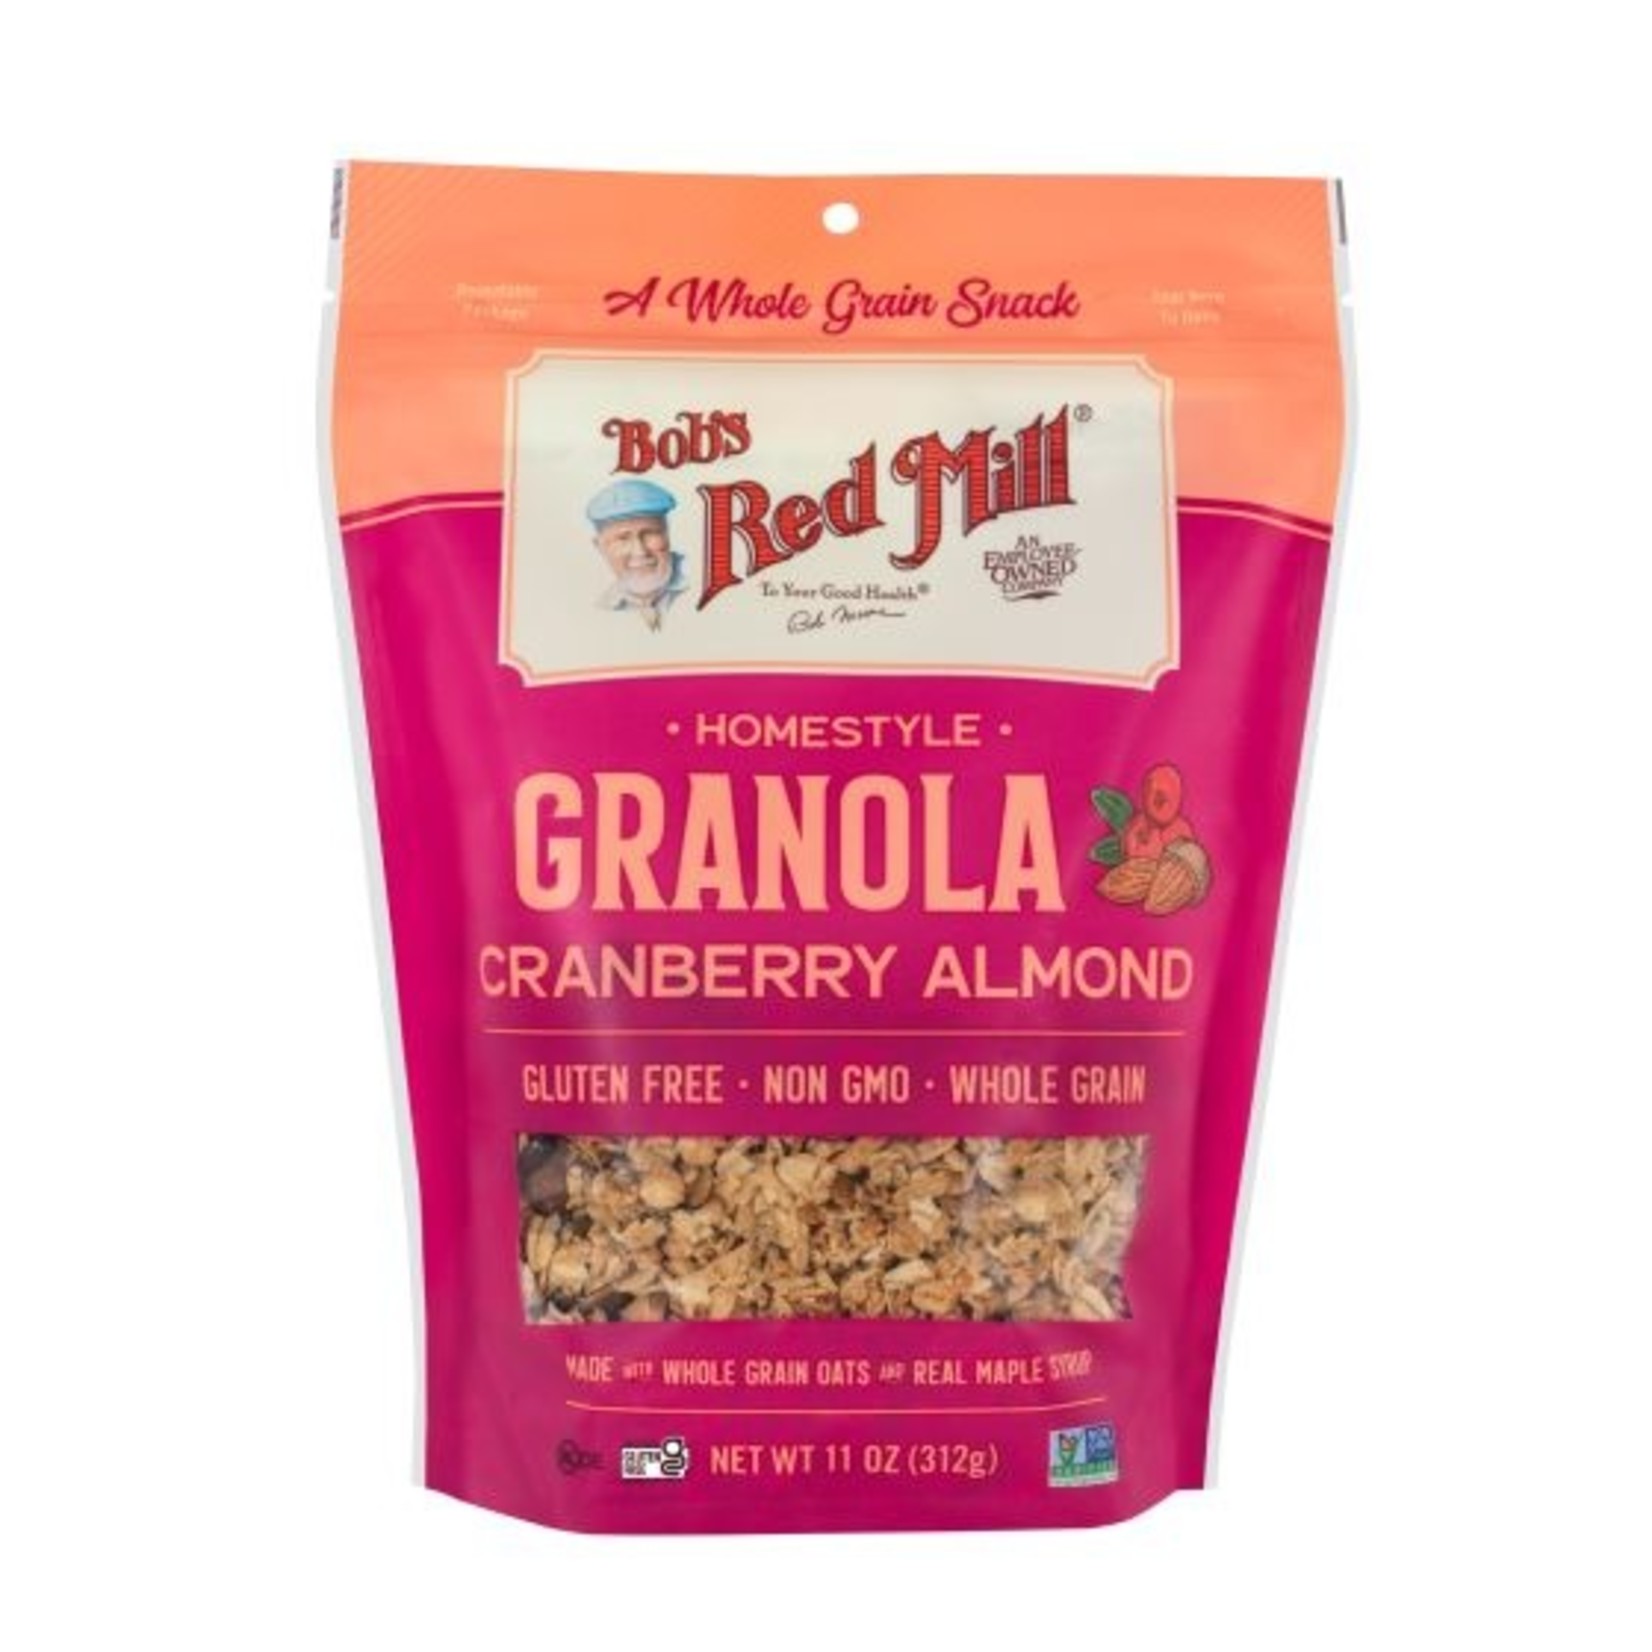 Bobs Red Mill Bobs Red Mill - Homestyle Granola Cranberry Almond - 11 oz